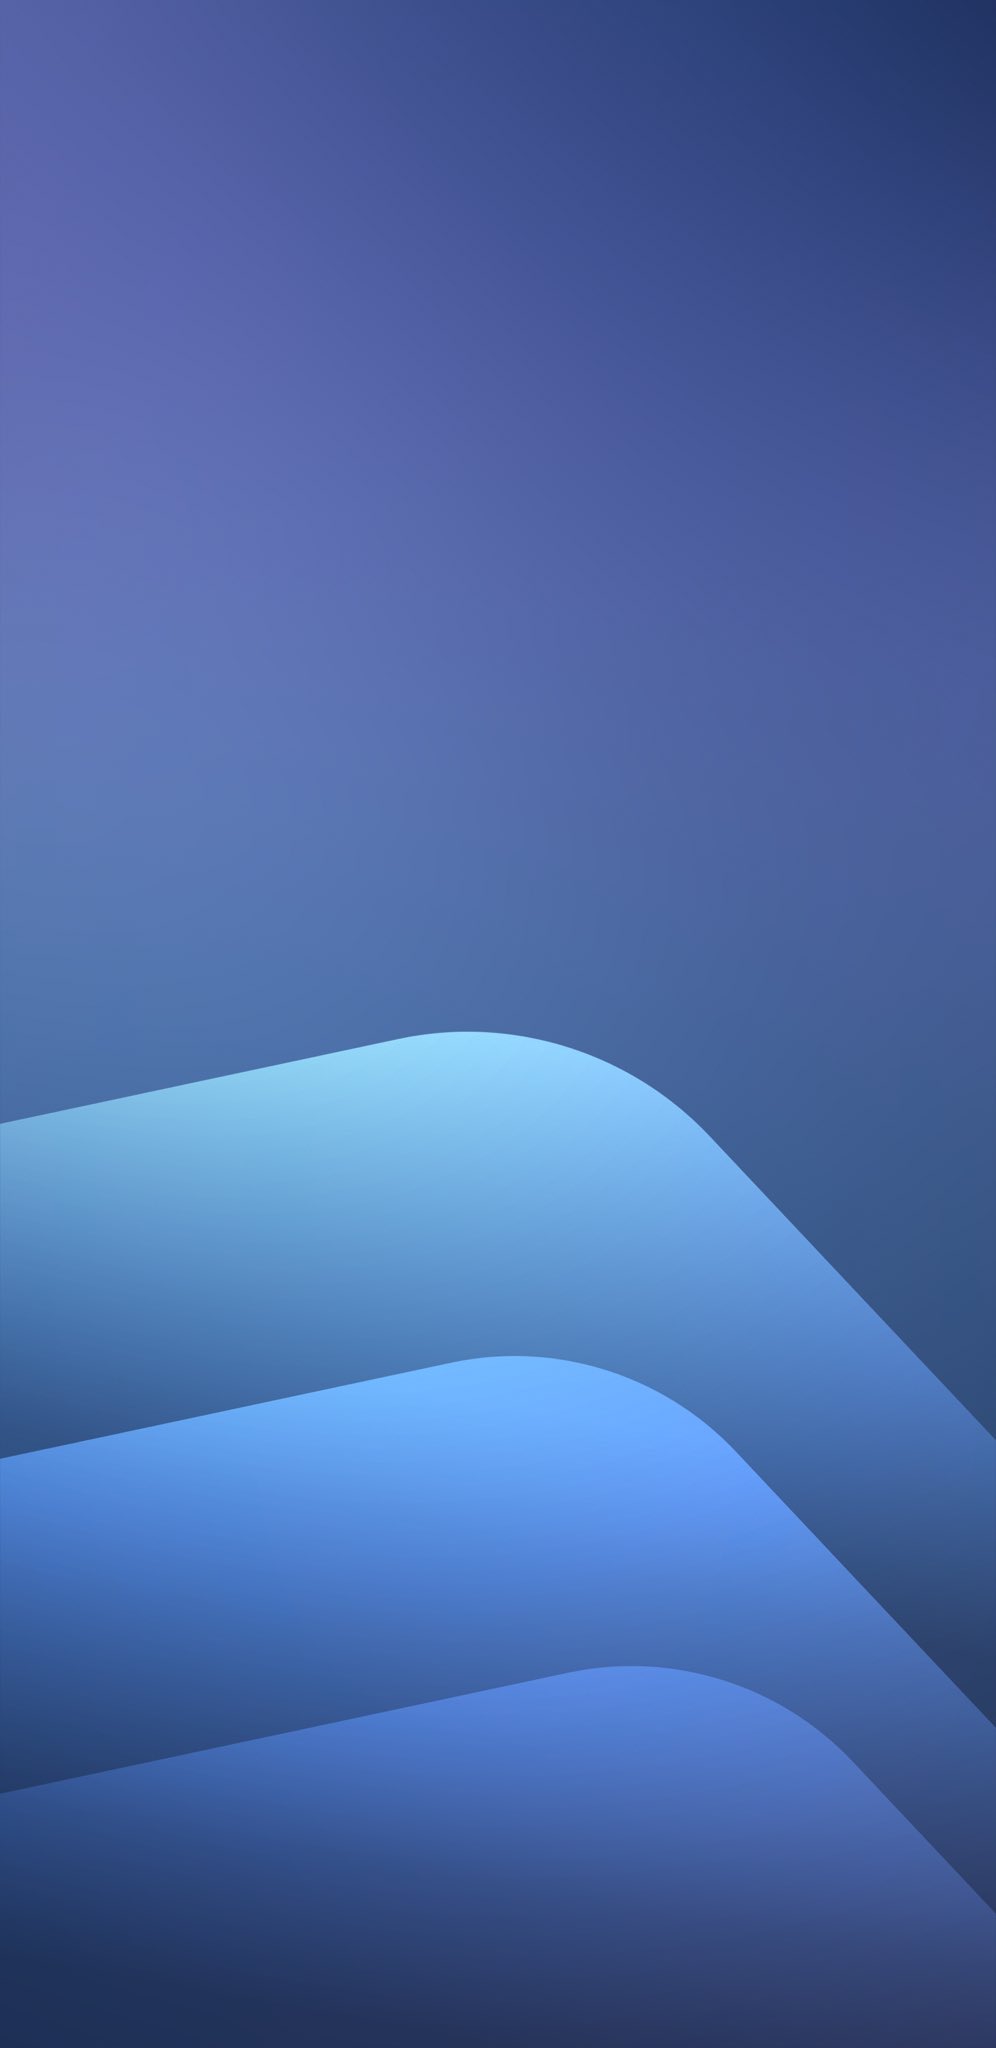 Download these blue wallpapers for iPhone iPad and Mac 996x2048